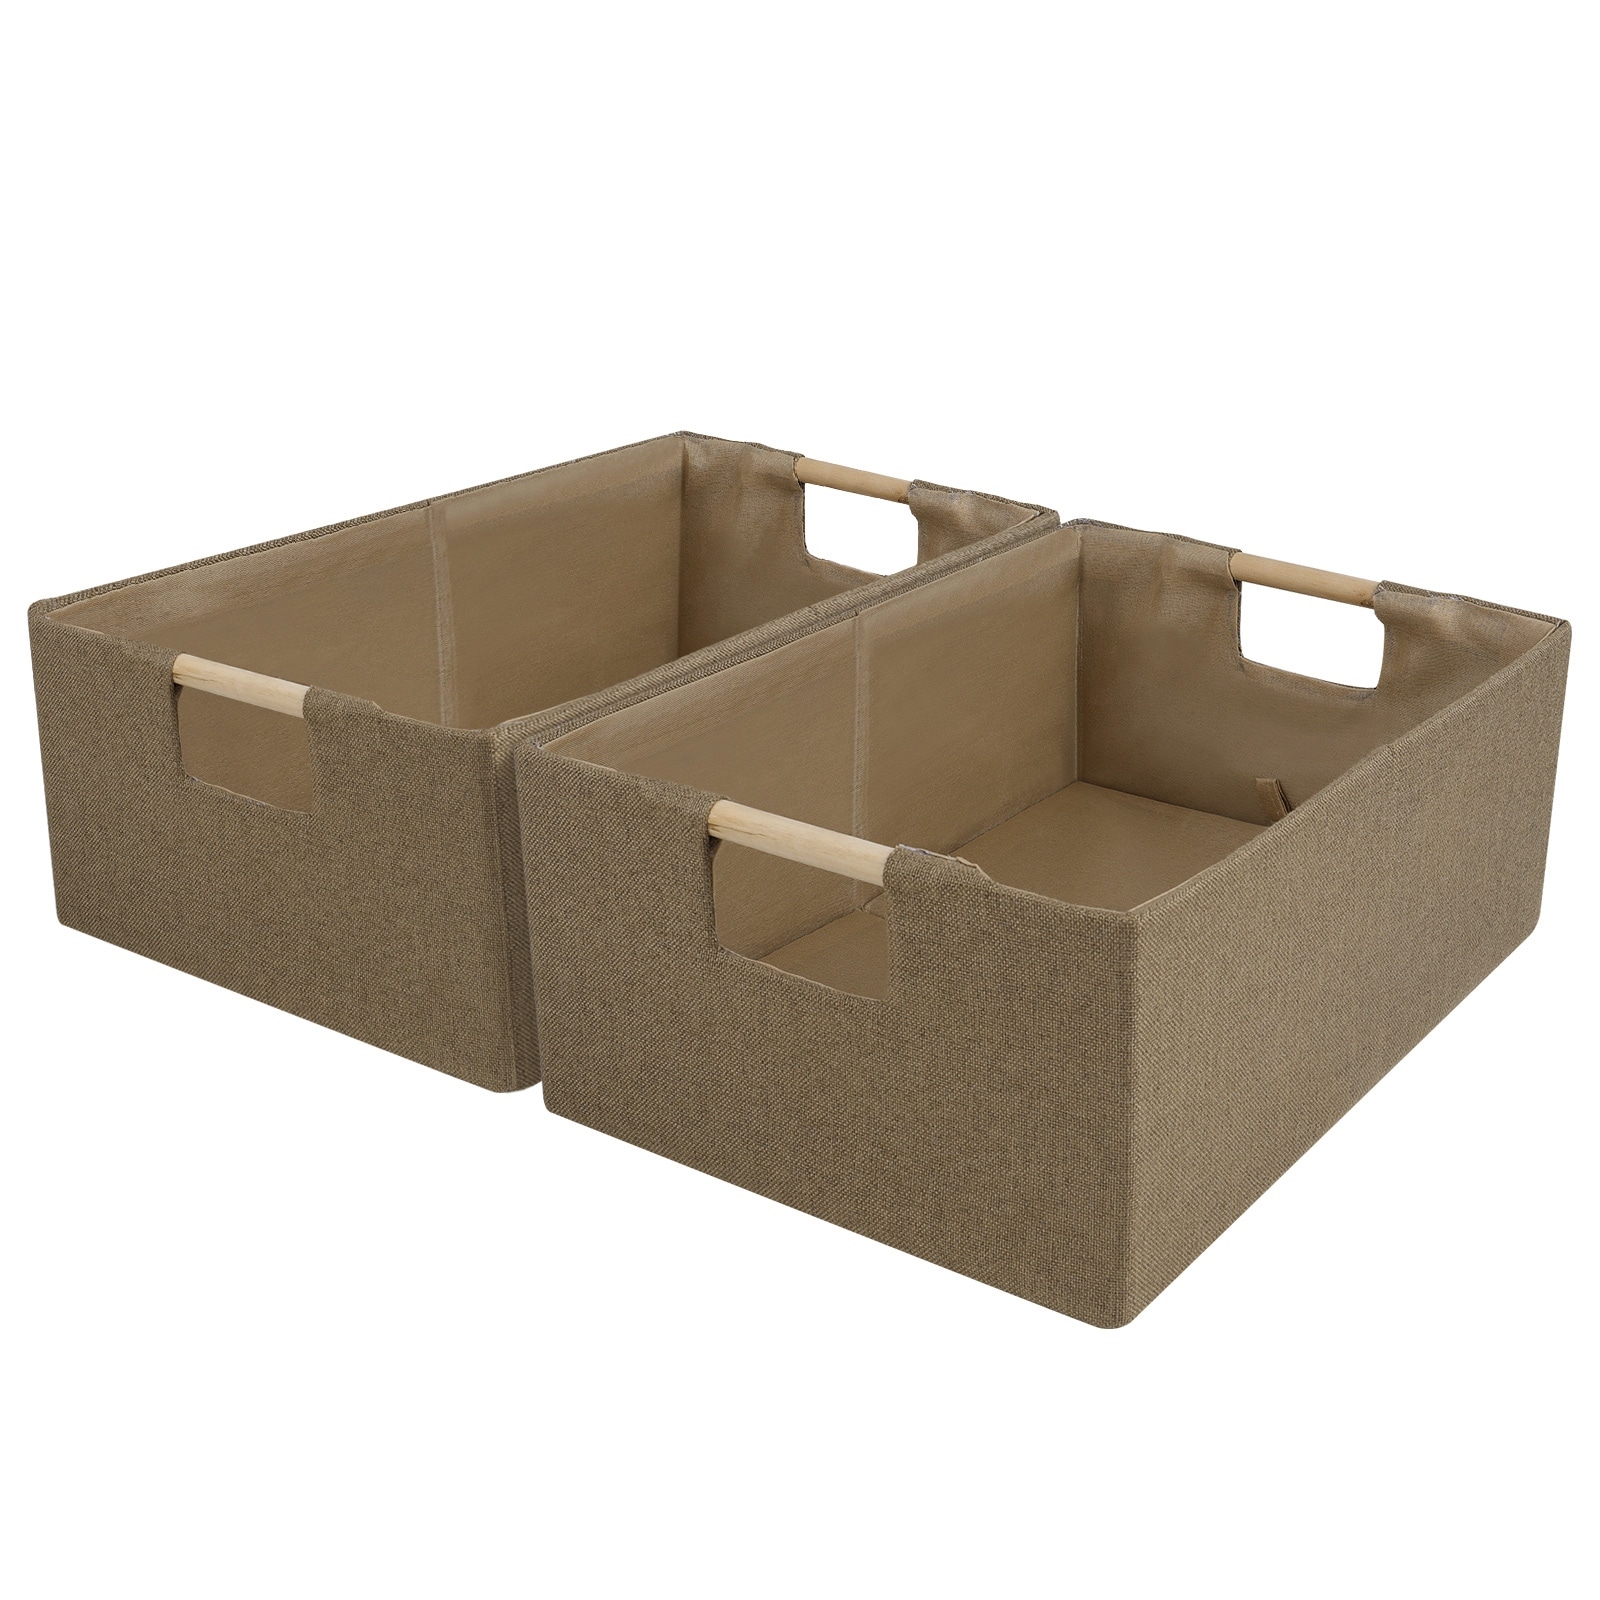 https://ak1.ostkcdn.com/images/products/is/images/direct/8f7c12be0cb5049c5549e39e2bf512a2fa273d25/Fabric-Foldable-Storage-Bins-Organizer-Container-W-Wood-Handles-2Pcs.jpg